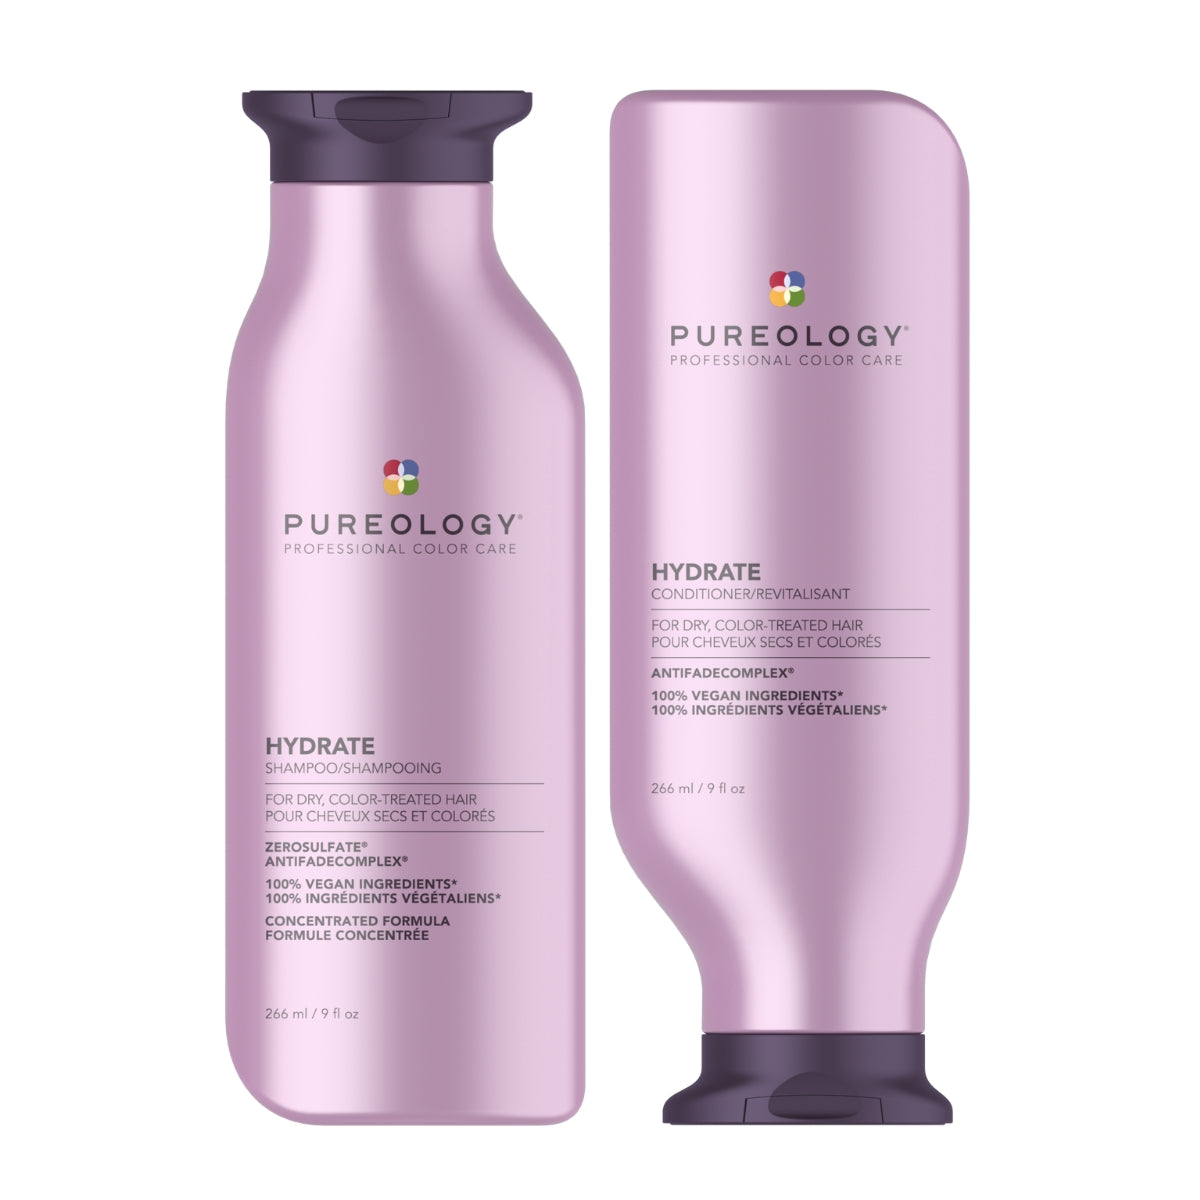 Pureology Hydrate Shampoo and Conditioner Moisturising Bundle For Dry Hair, Sulphate Free for a Gentle Cleanse, Vegan Formulas